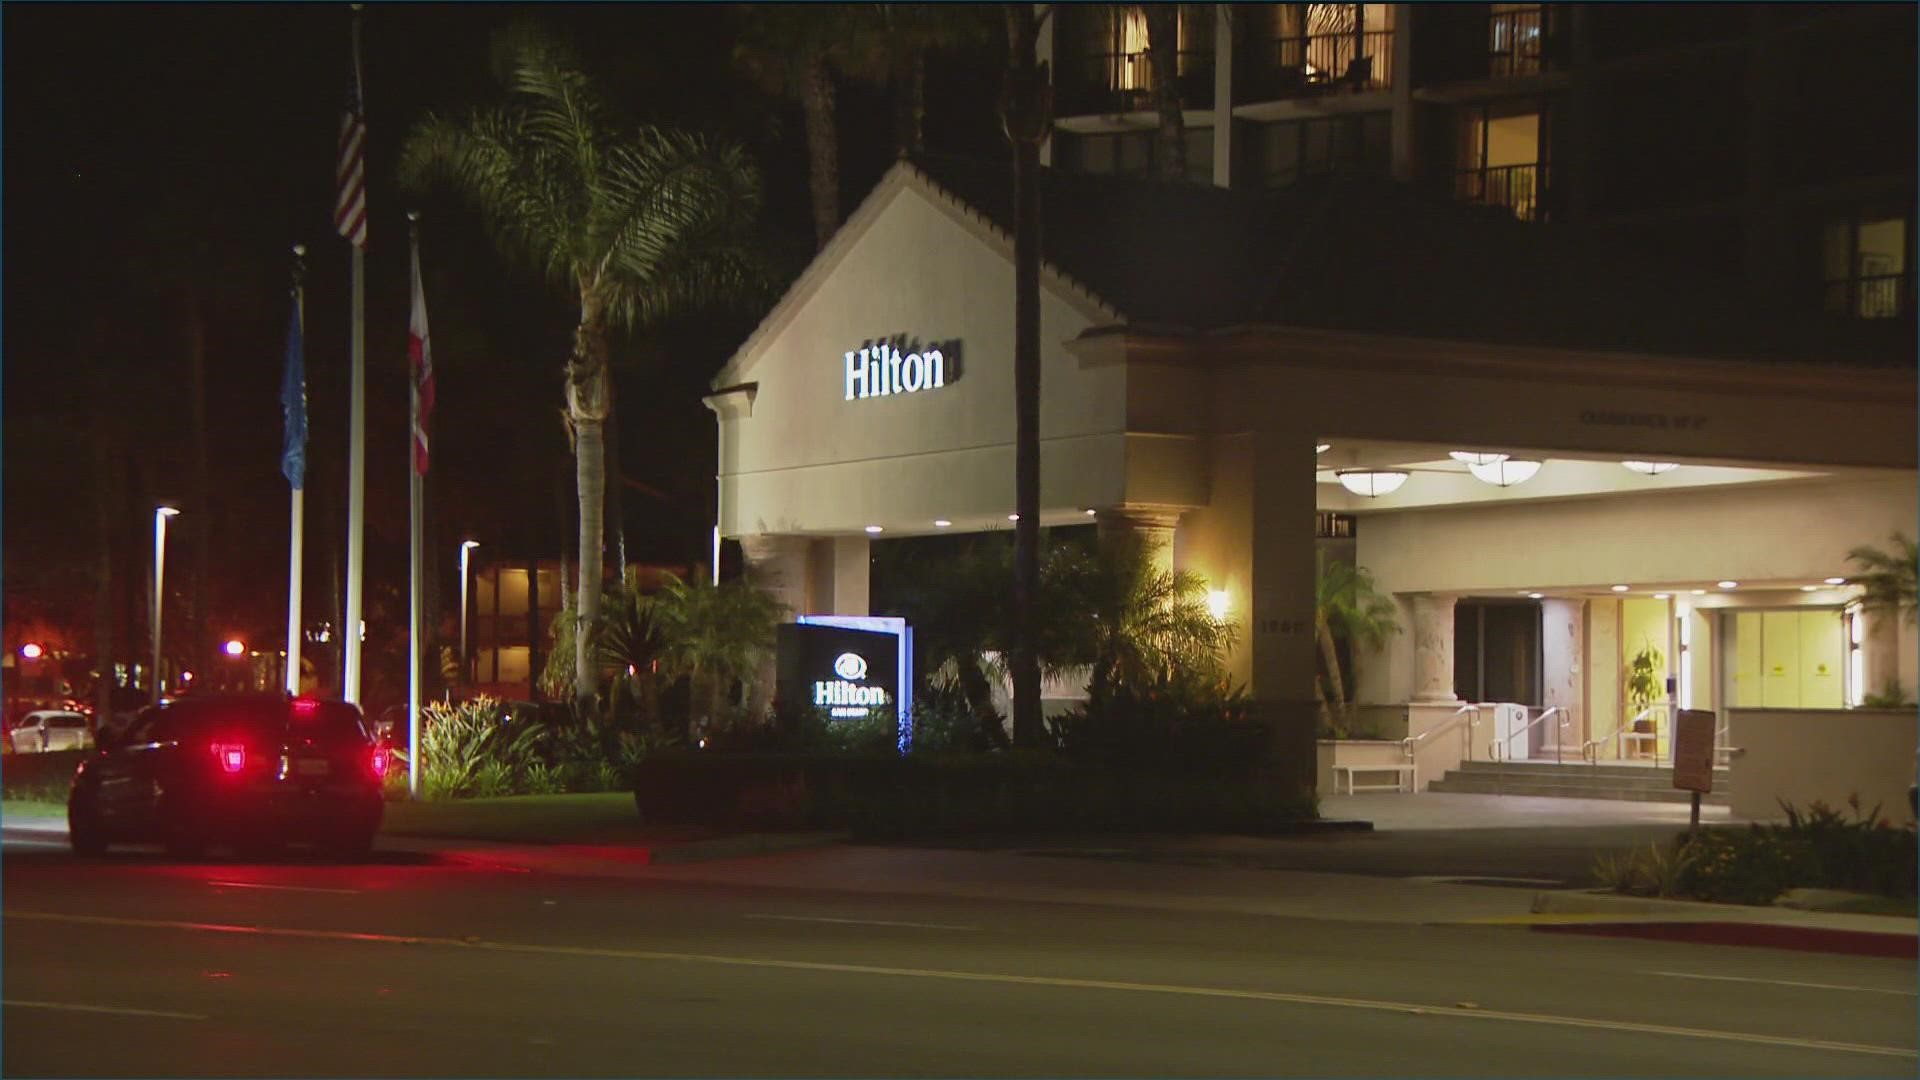 A man and a woman were found dead of gunshot wounds in a hotel room near San Diego International Airport.